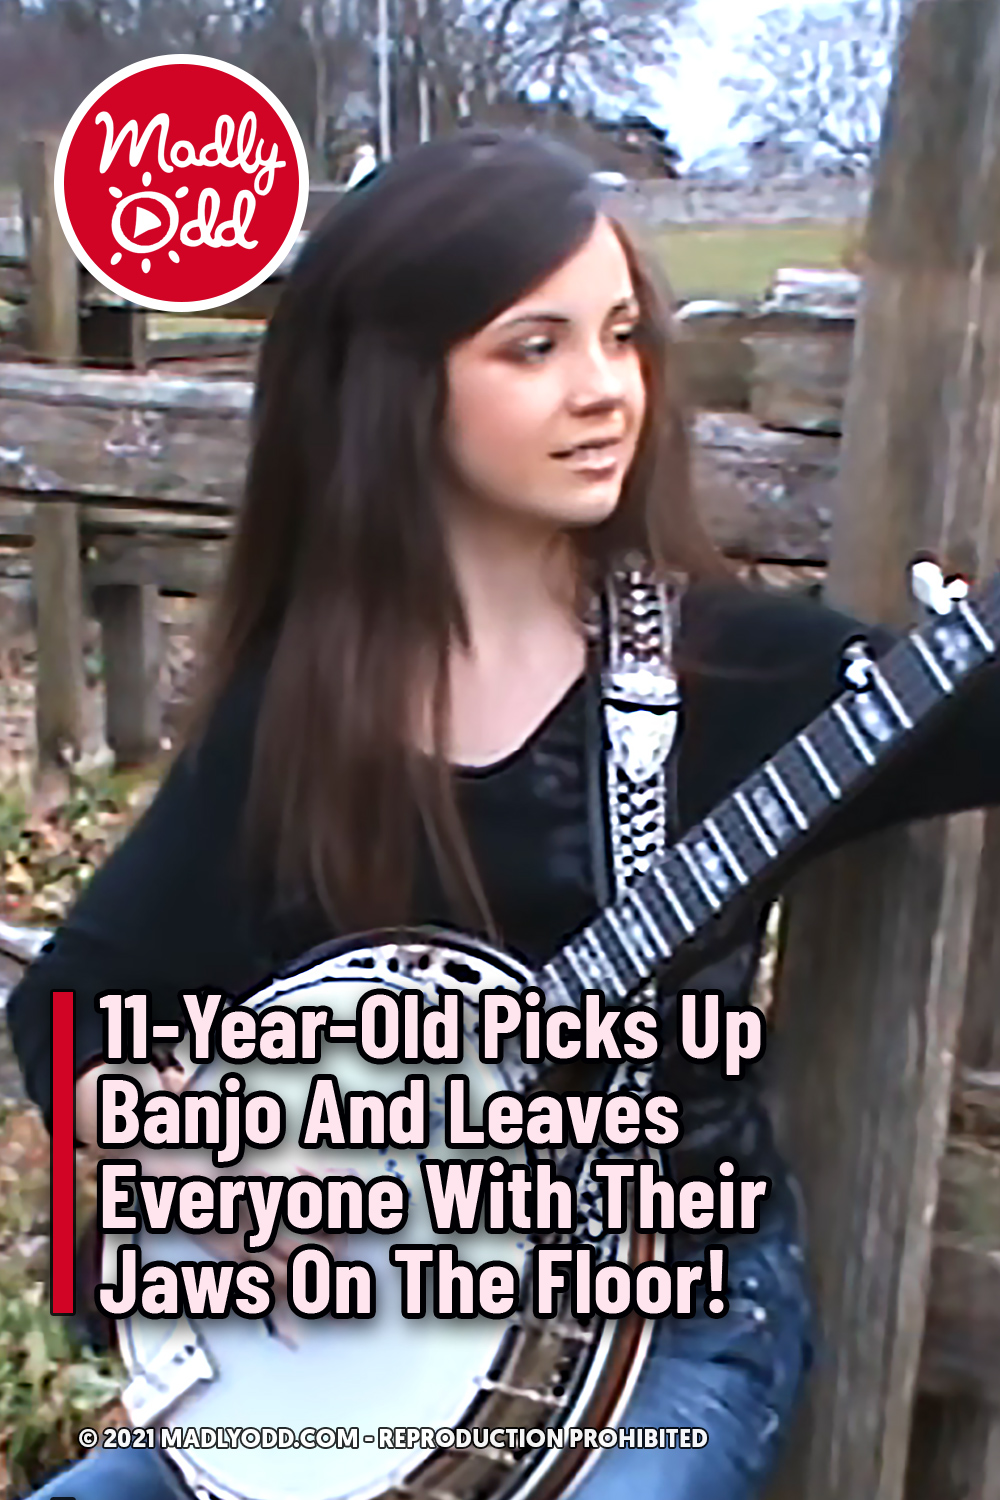 11-Year-Old Picks Up Banjo And Leaves Everyone With Their Jaws On The Floor!